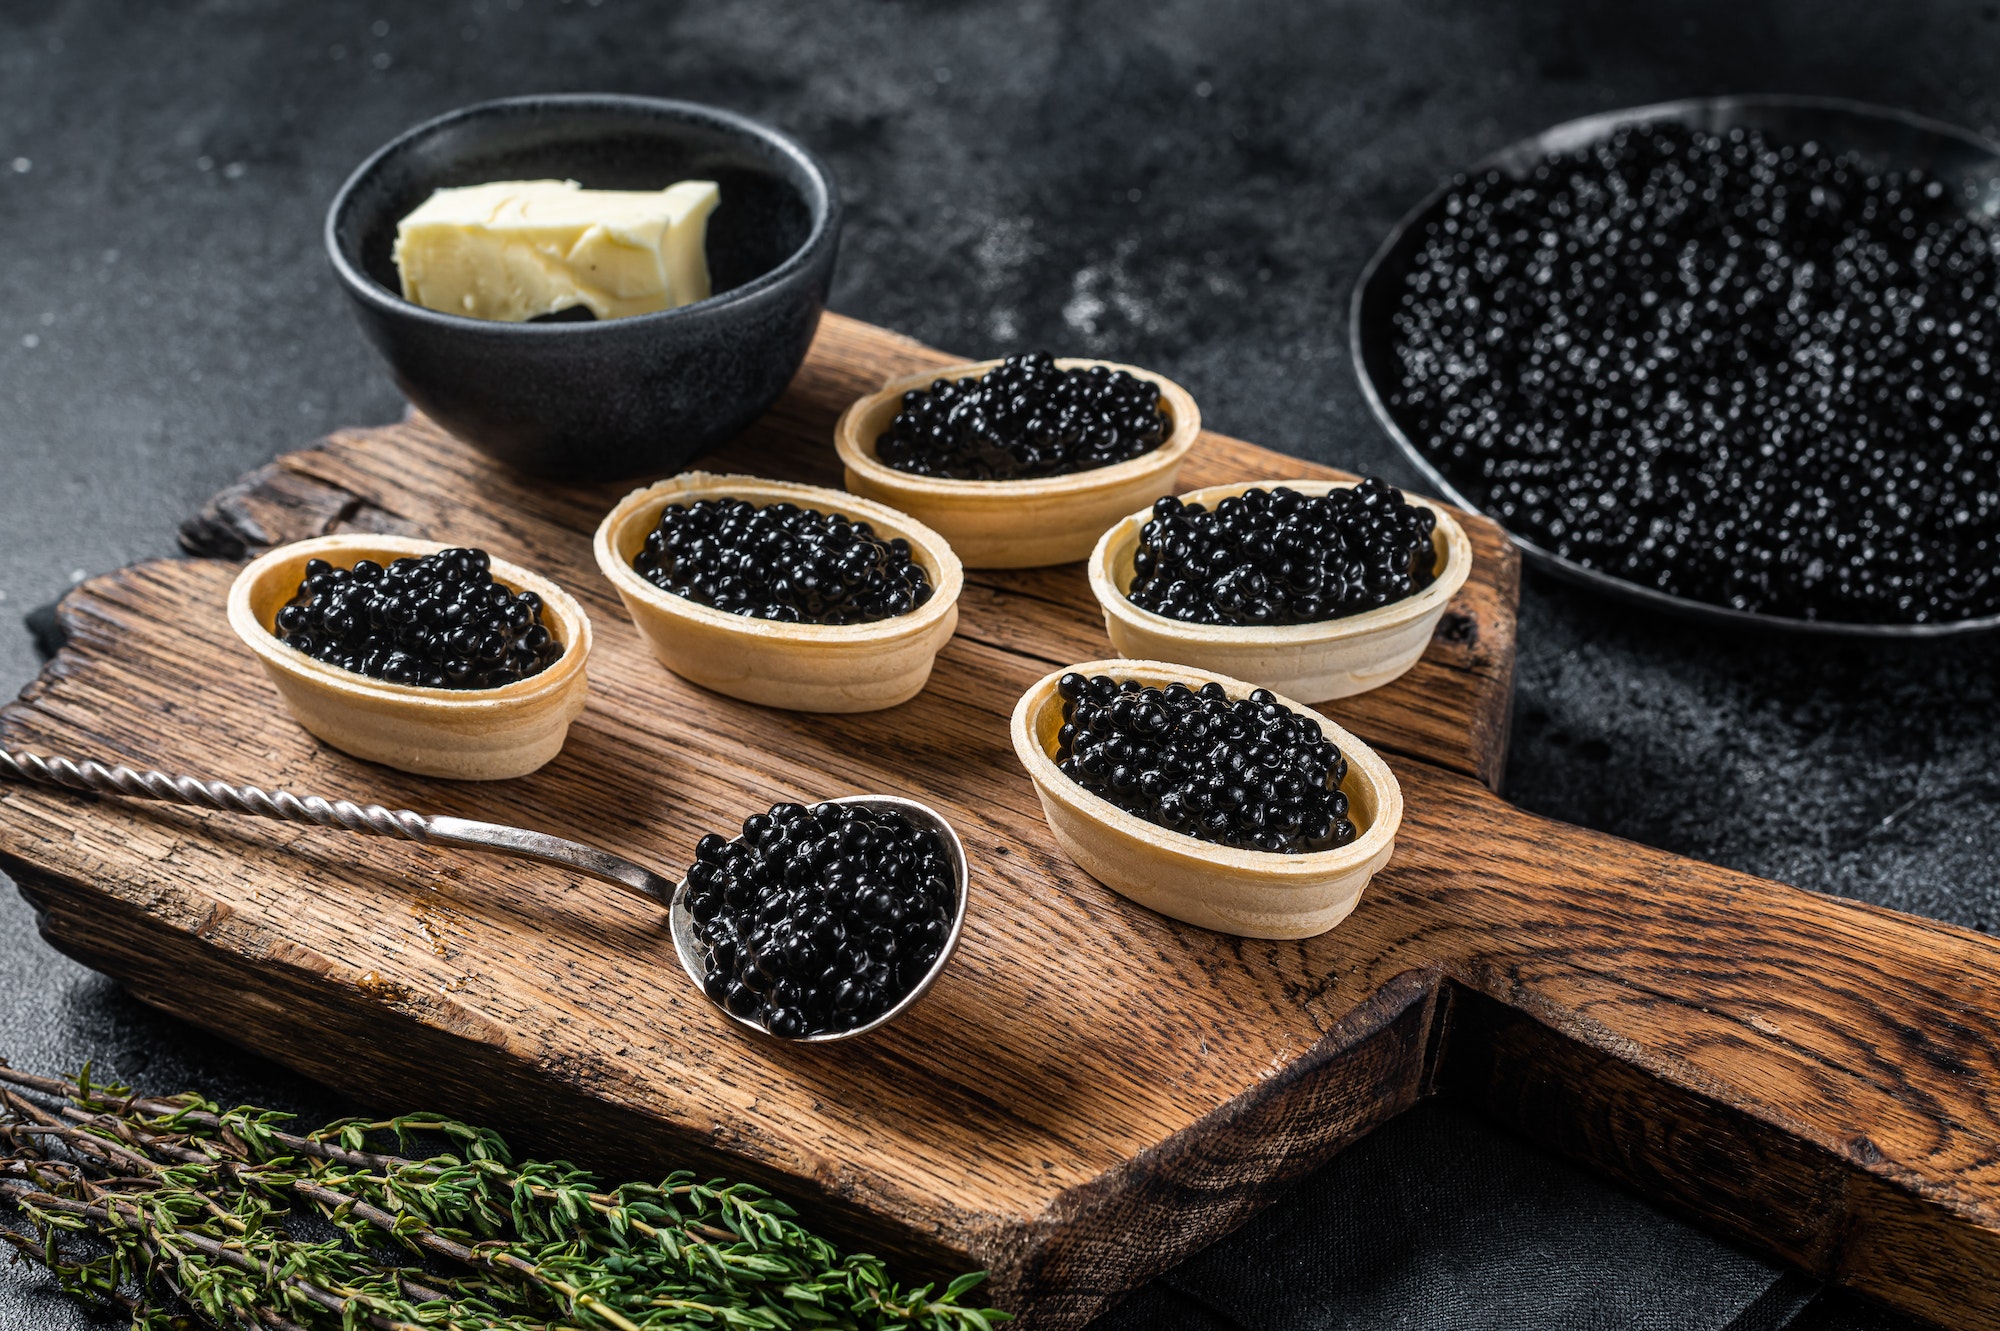 Tartlets with Sturgeon Black caviar on wooden board. Black background. Top view